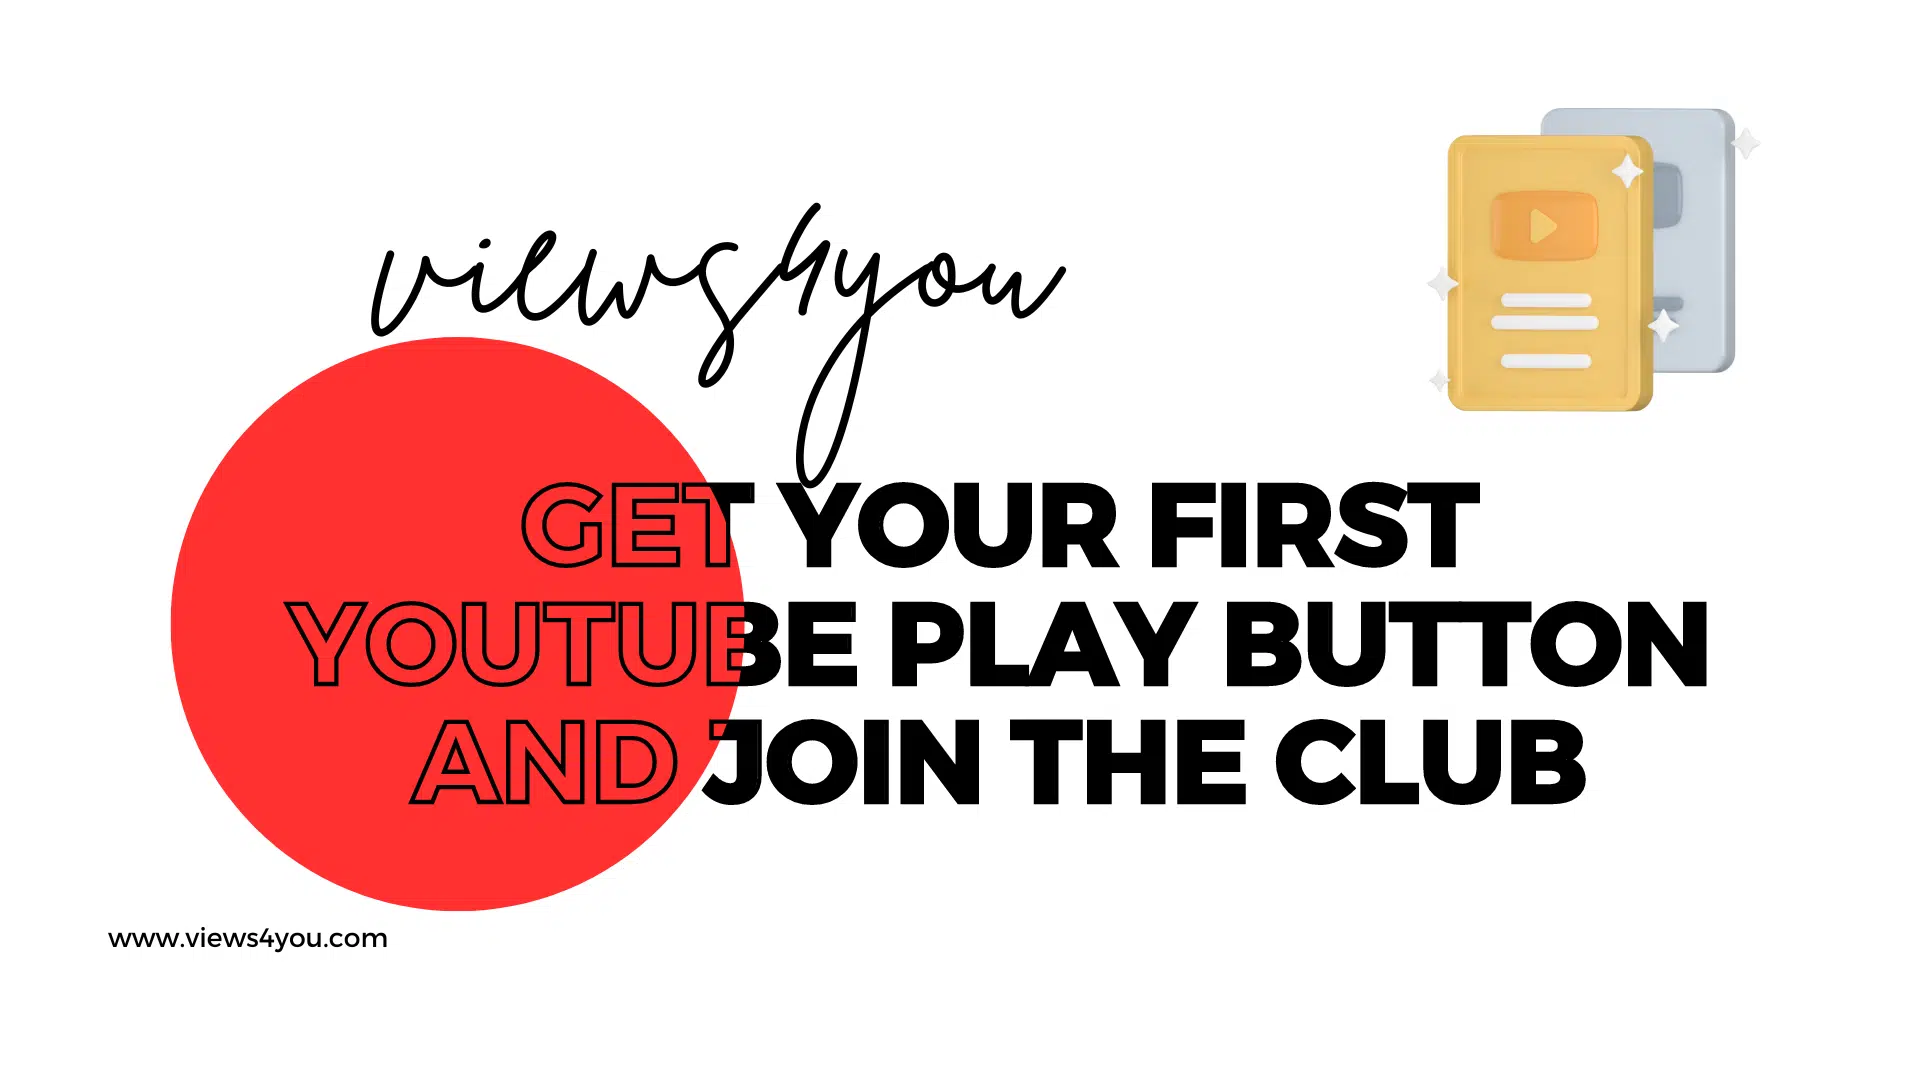 Learn how to get your first youtube play button